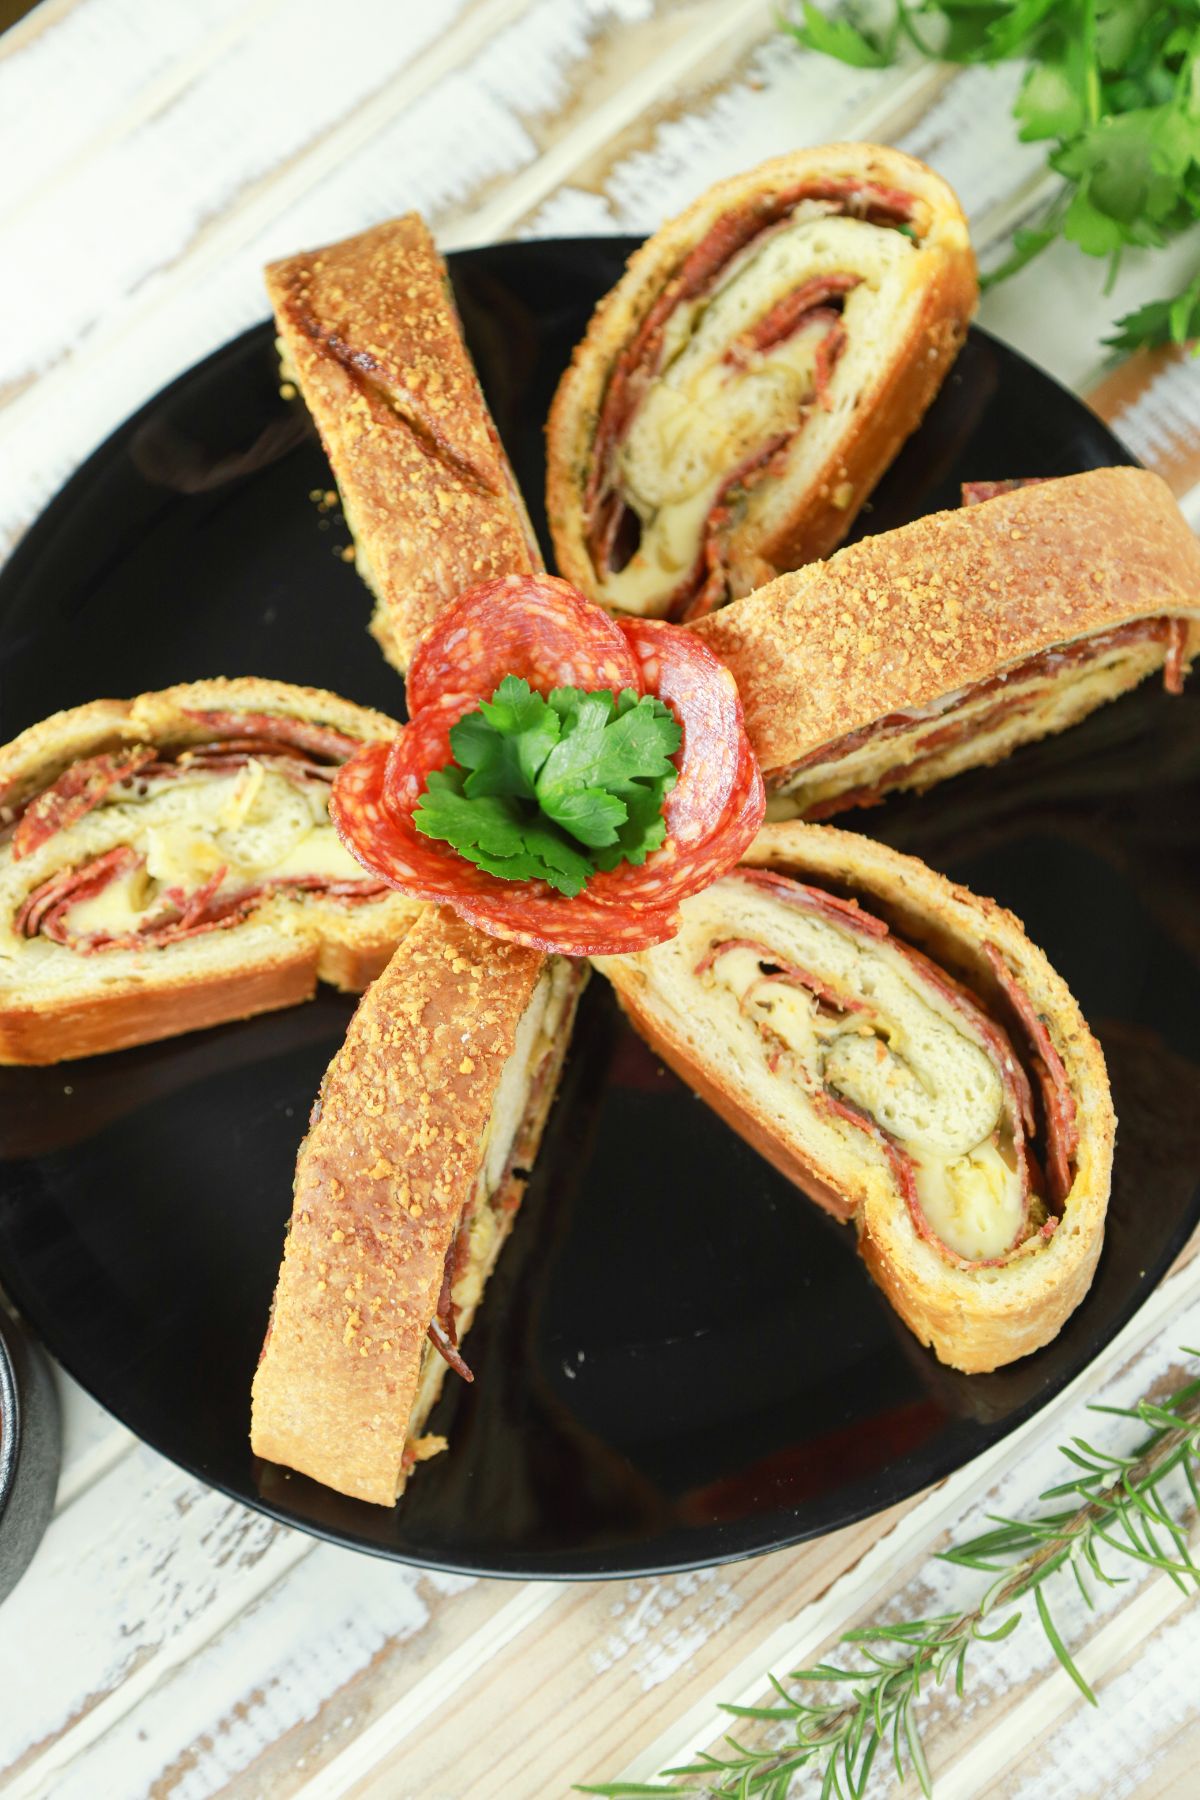 round black plate holding stromboli slices with pepperoni rose in the center